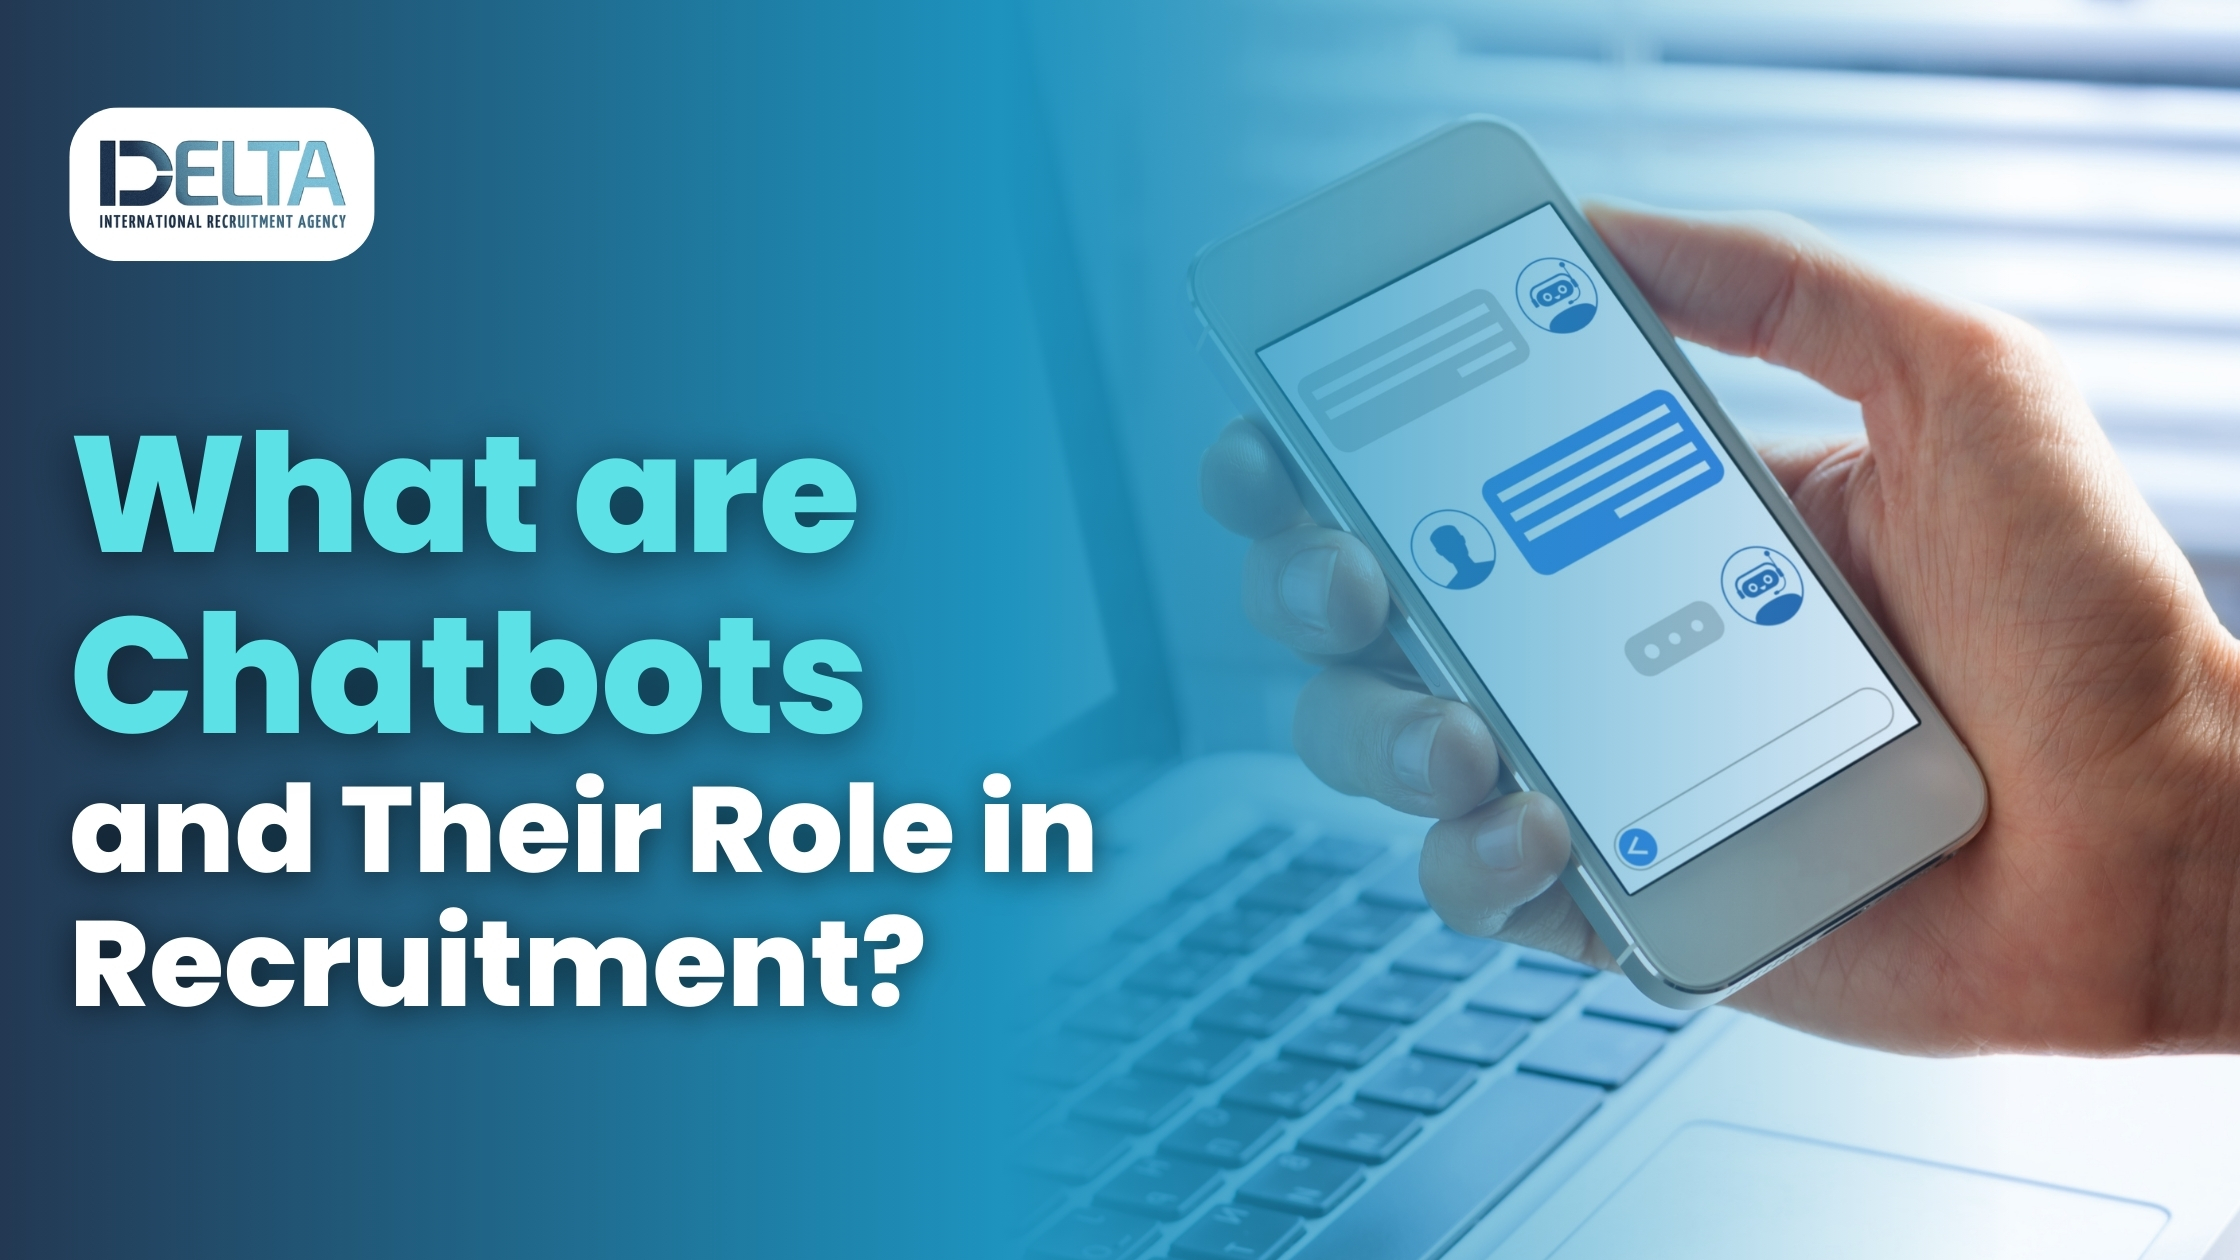 What are Chatbots and Their Role in Recruitment?